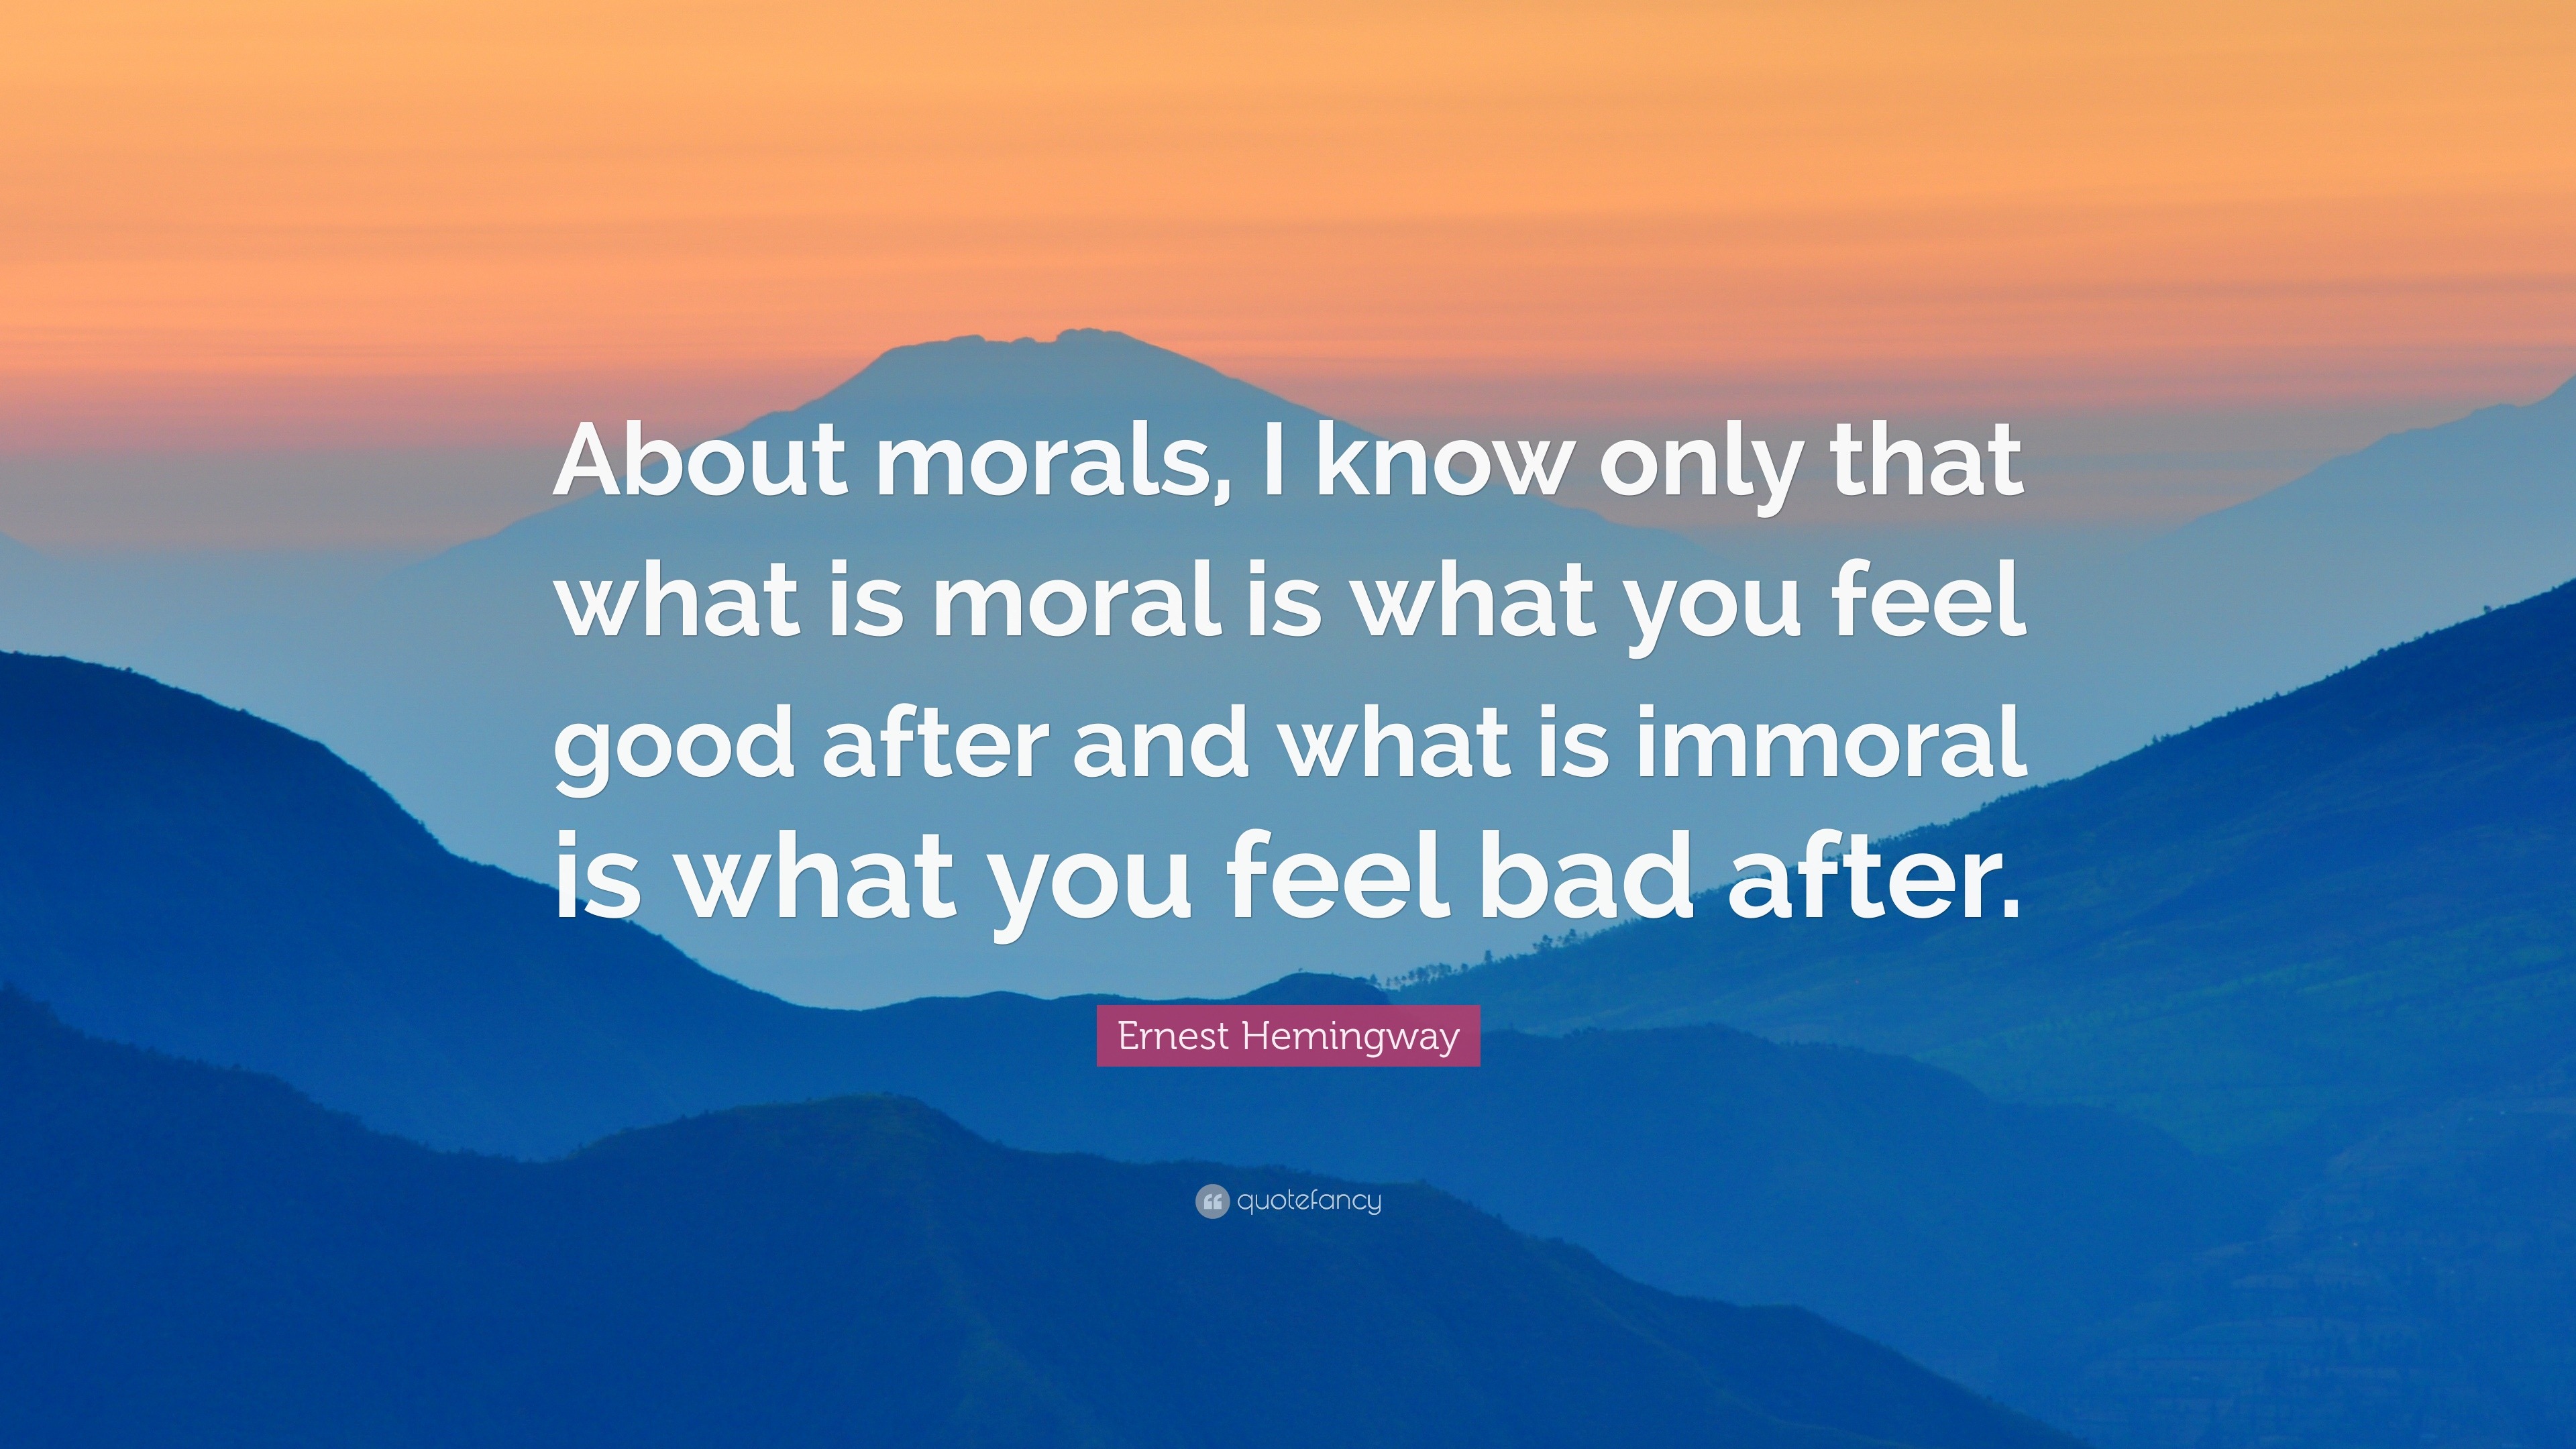 Ernest Hemingway Quote: “About morals, I know only that what is moral ...